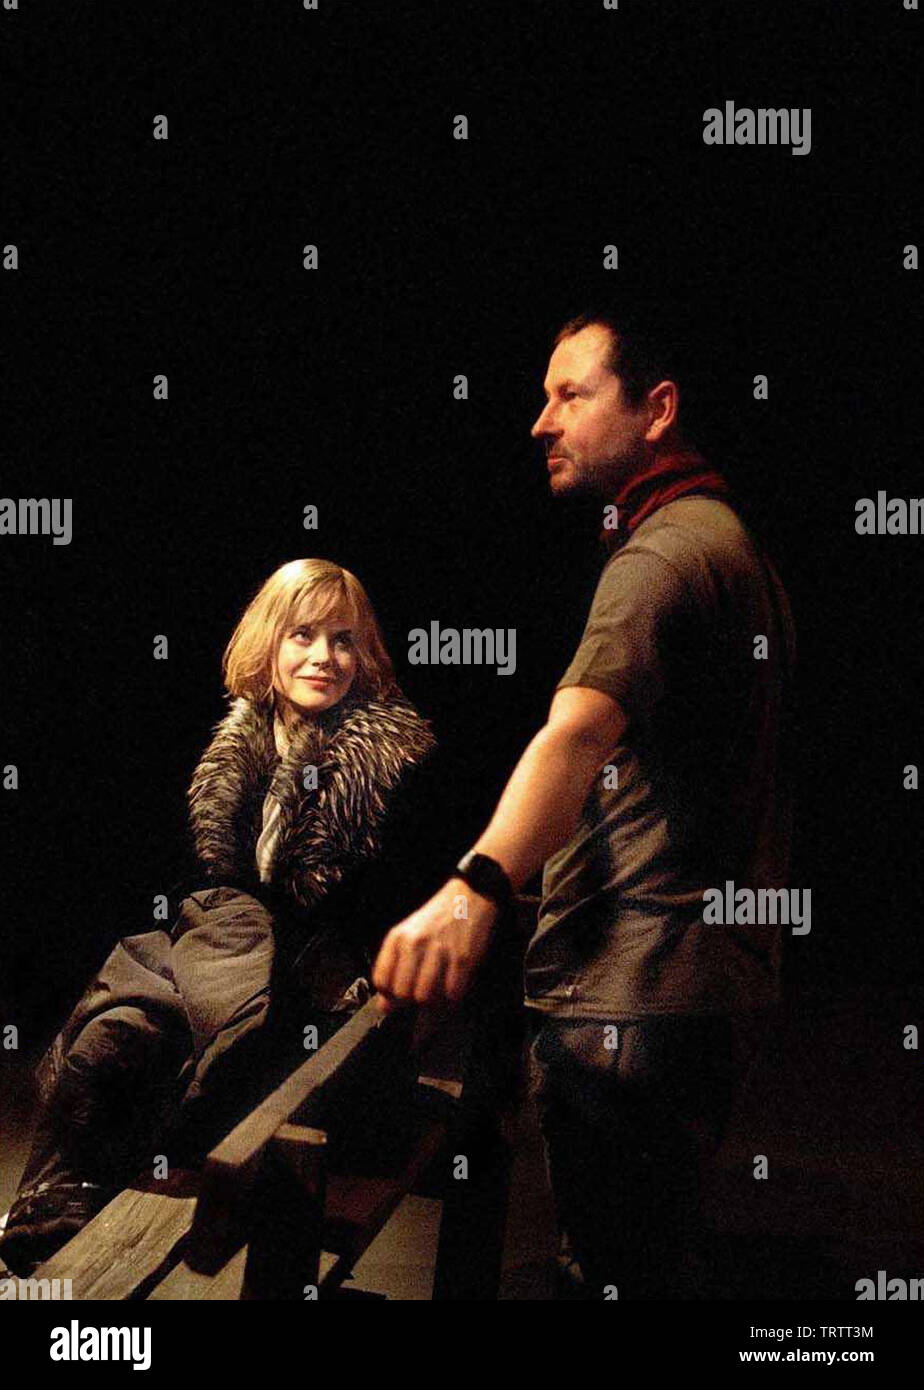 NICOLE KIDMAN and LARS VON TRIER in DOGVILLE (2003). Copyright: Editorial use only. No merchandising or book covers. This is a publicly distributed handout. Access rights only, no license of copyright provided. Only to be reproduced in conjunction with promotion of this film. Credit: FILMMEK / KONOW, ROLF / Album Stock Photo